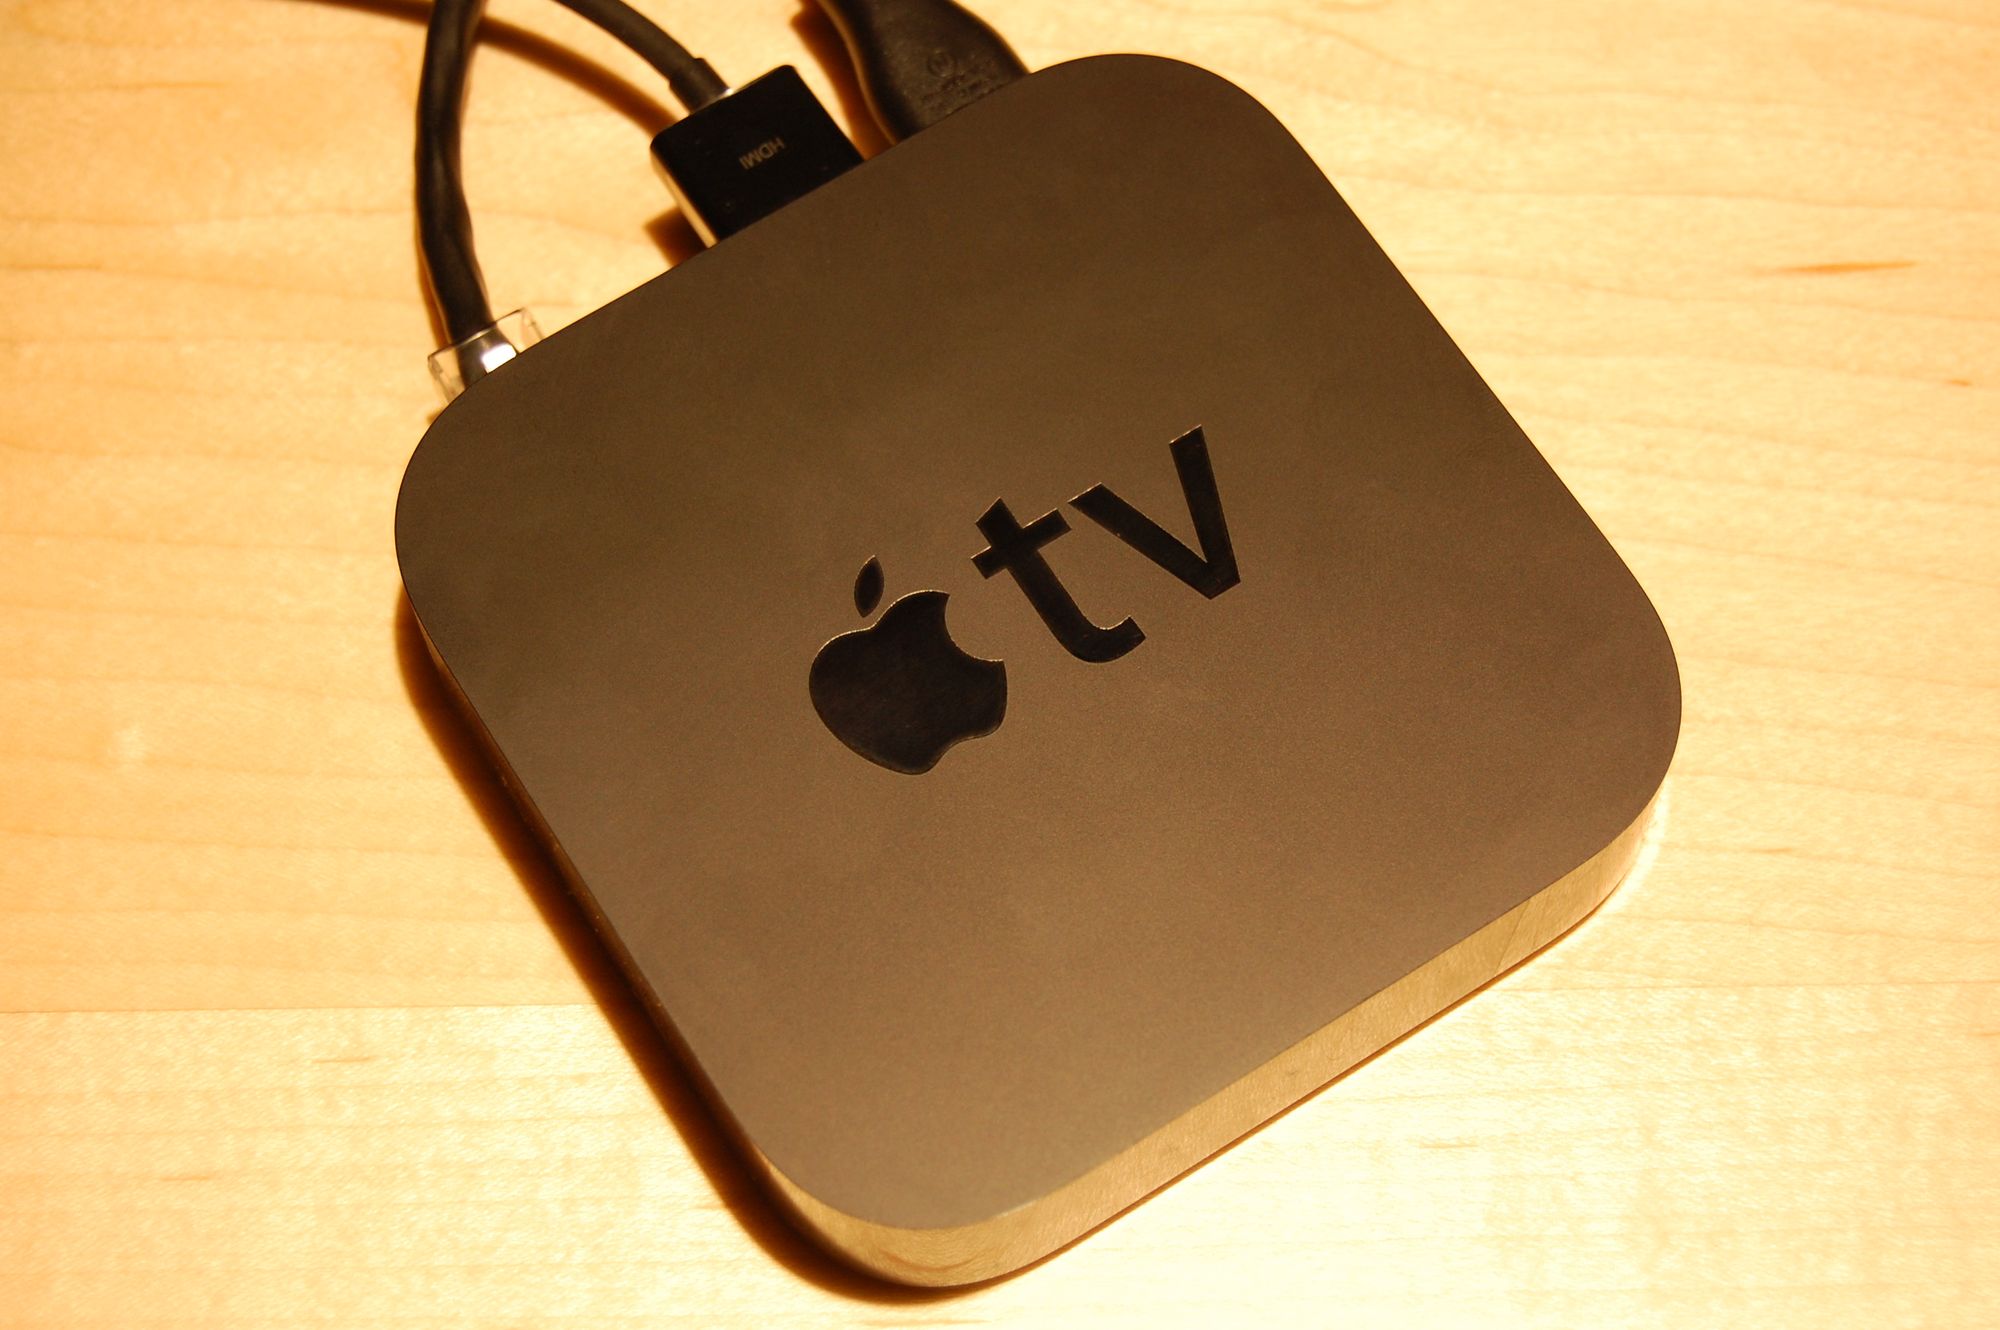 "Apple Tv (12478148855)" by Maurizio Pesce from Milan, Italia is licensed under CC BY 2.0. 